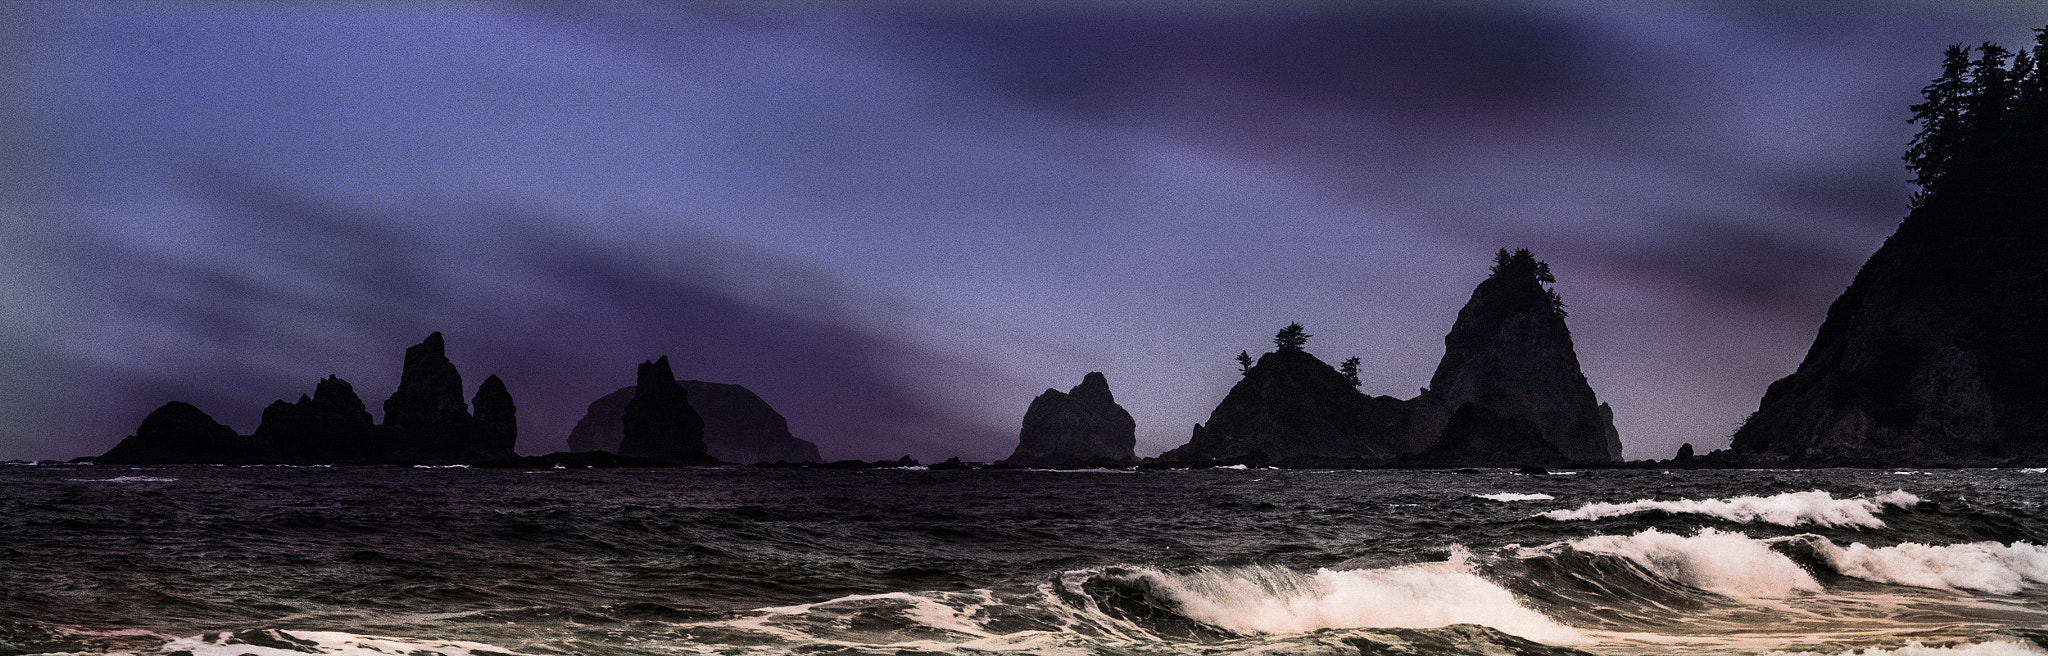 Nikon D800 + Nikon AF-S Nikkor 70-200mm F4G ED VR sample photo. Storm at the sea stacks in the olympic peninsula photography